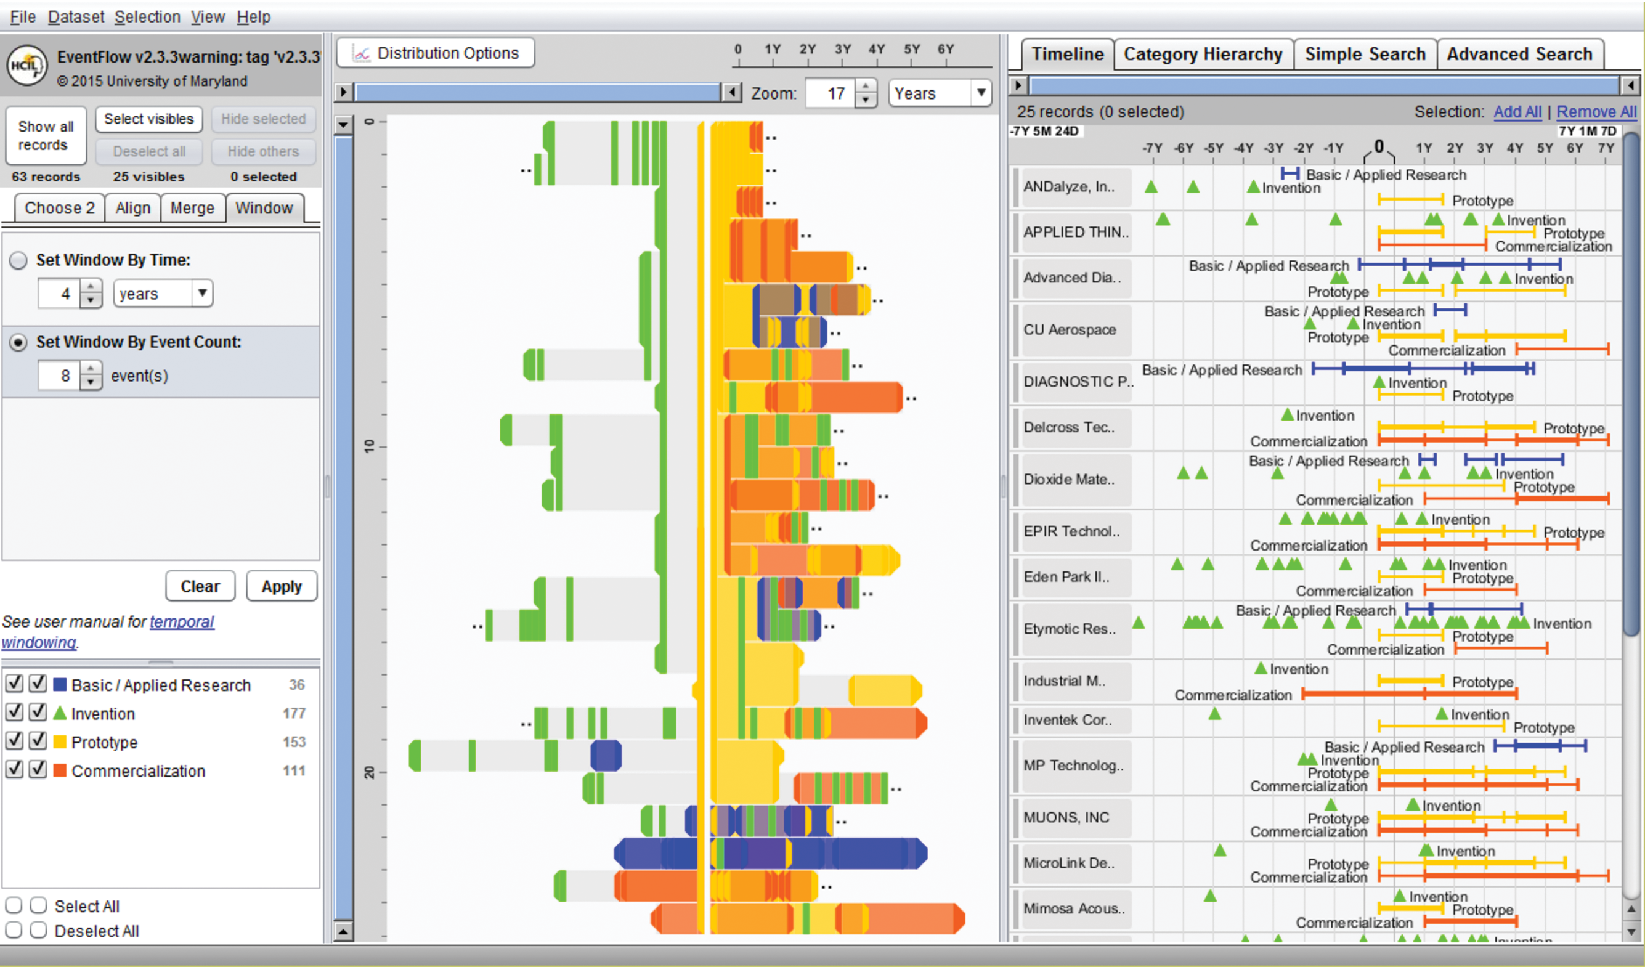 EventFlow (https://hcil.umd.edu/eventflow/) is used to visualize sequences of innovation activities by Illinois companies. Created with EventFlow; data sources include NIH, NSF, USPTO, SBIR. Image created by C. Scott Dempwolf, used with permission